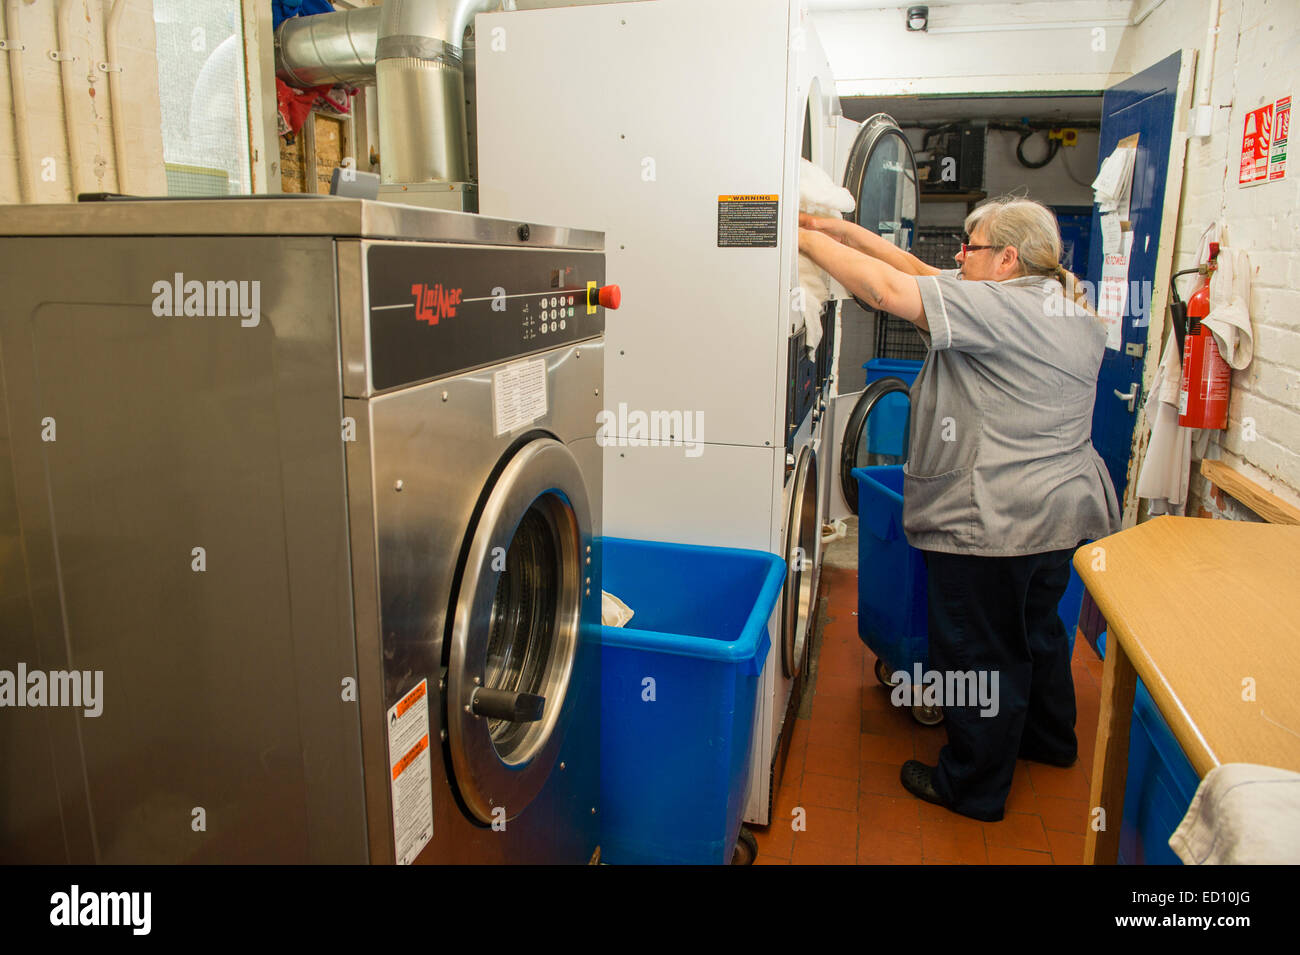 A woman working loading clothes into industrial size tumble dryers in the  laundry room at a hotel, UK Stock Photo - Alamy